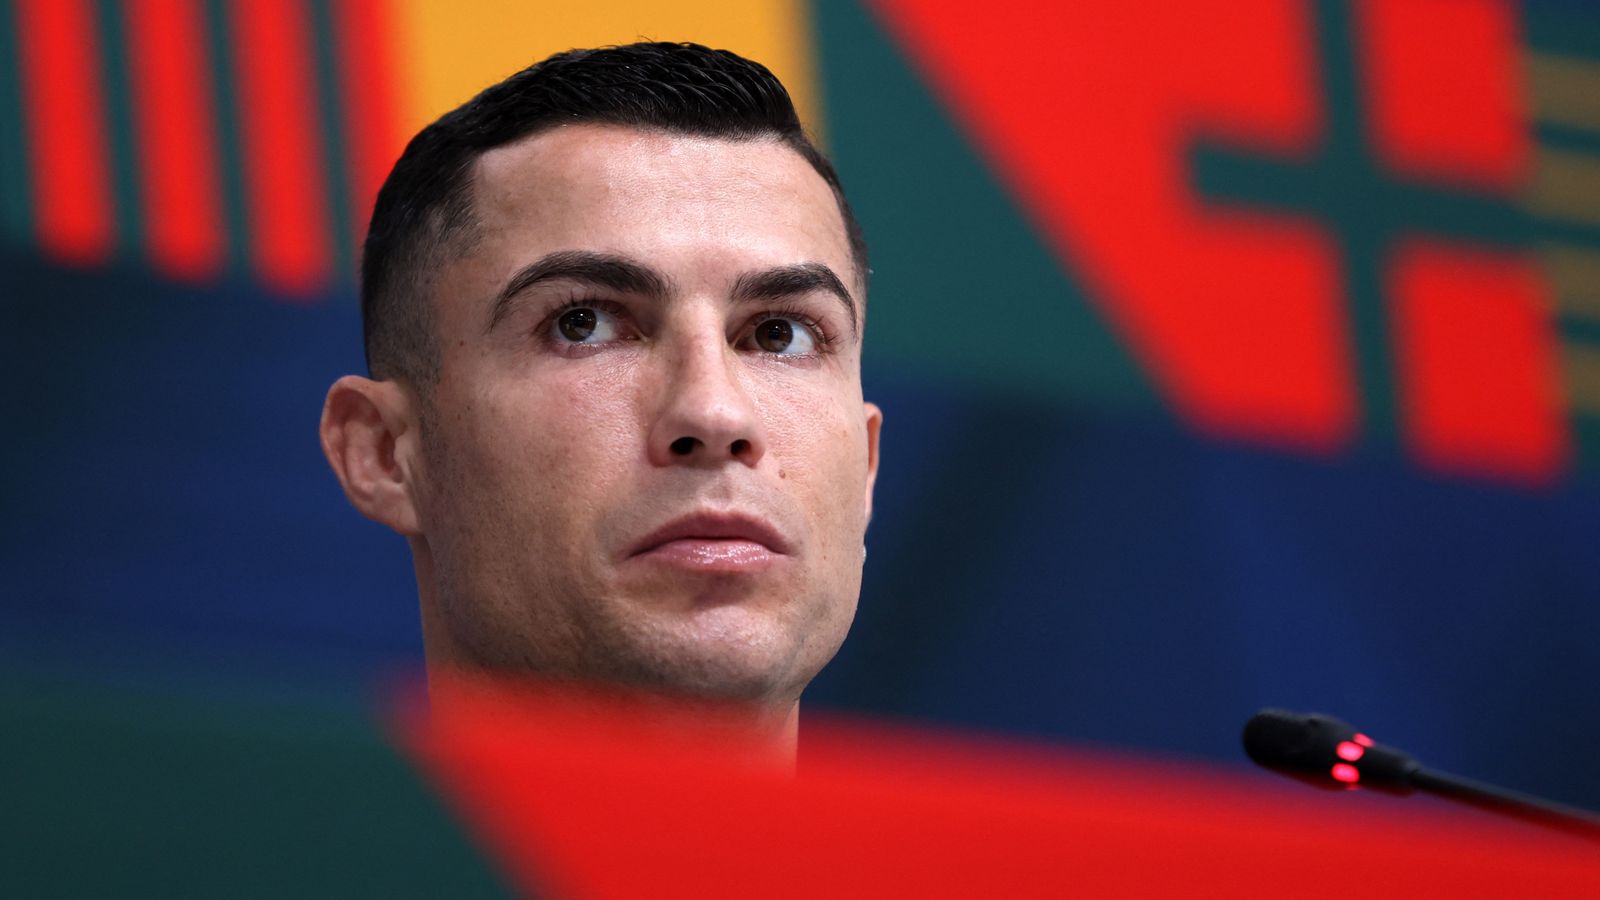 Cristiano Ronaldo breaks silence on explosive Manchester United interview saying 'I'm completely bullet-proof'